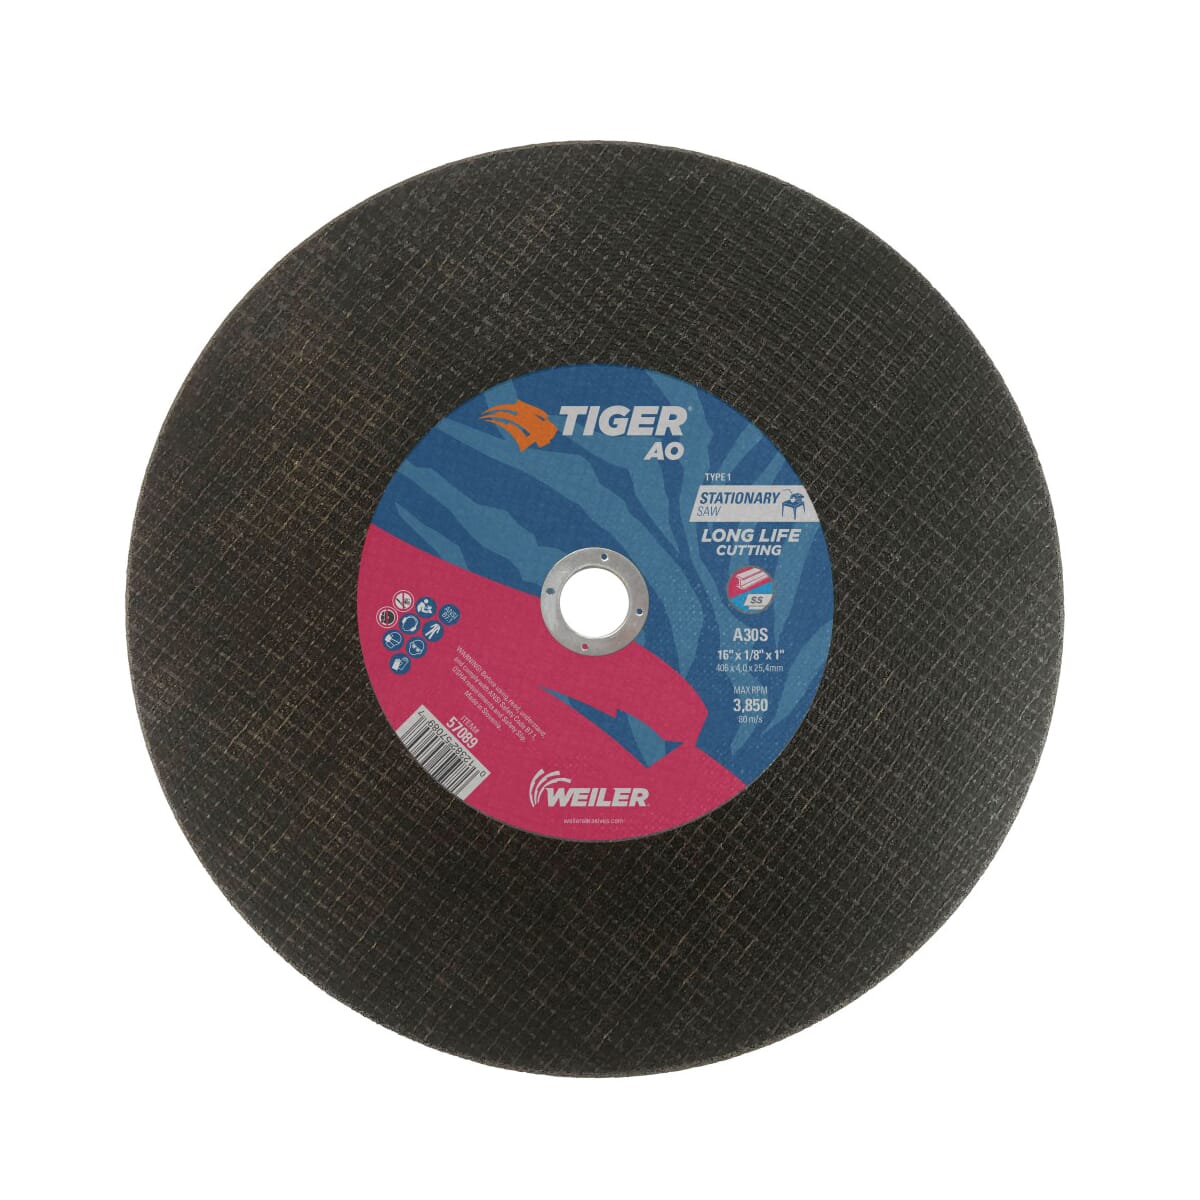 Tiger® AO 57089 Long Life Performance Cutting Wheel, 16 in Dia x 1/8 in THK, 1 in Center Hole, 30 Grit